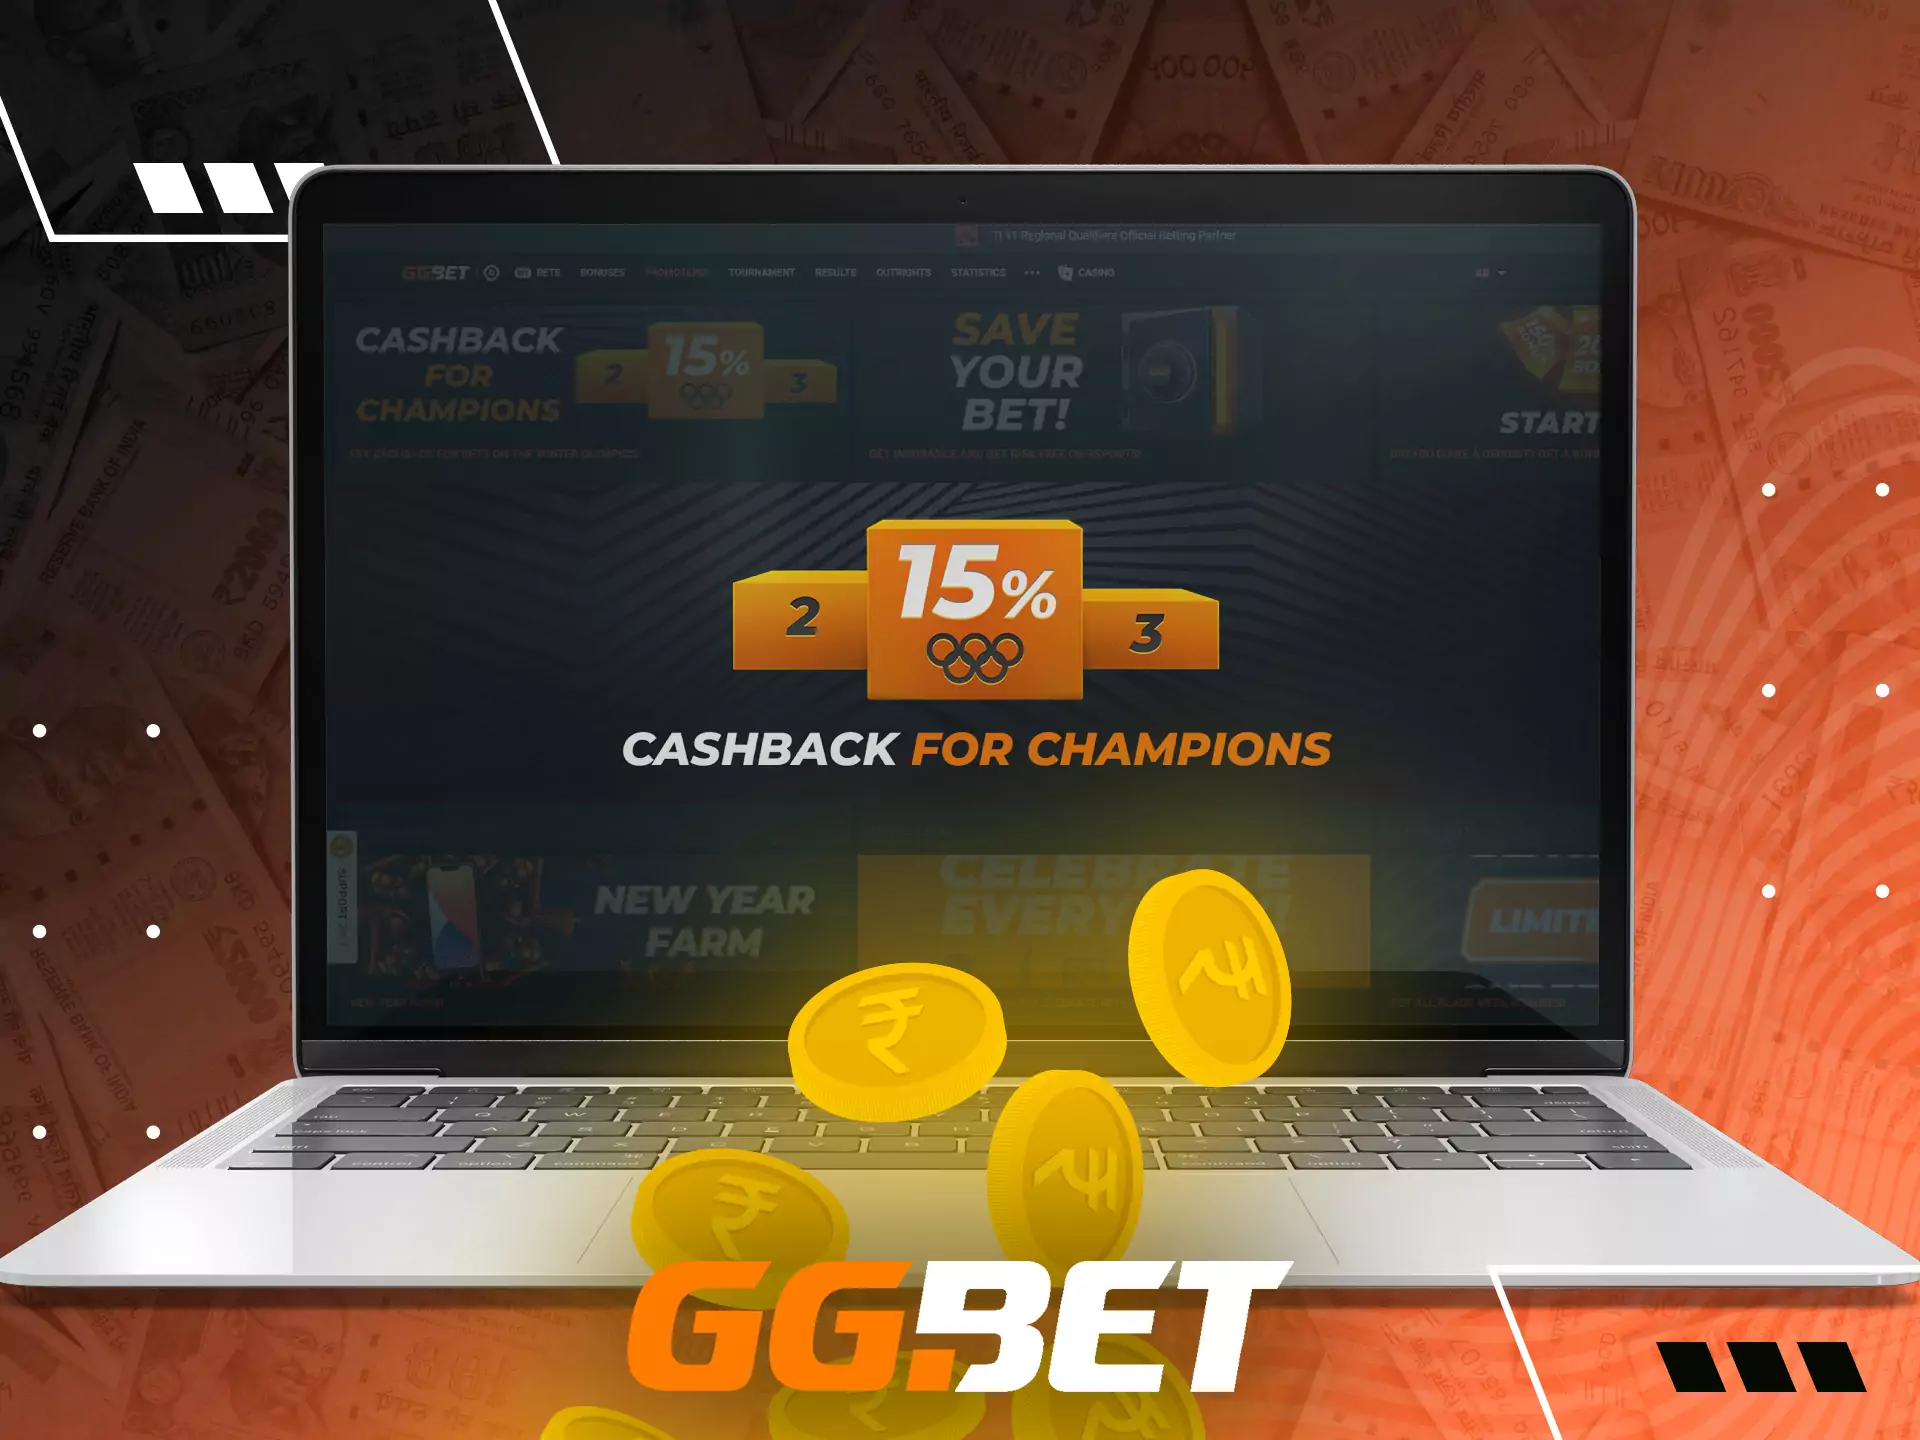 Besides bonuses, you can count on cashback from GGBet.